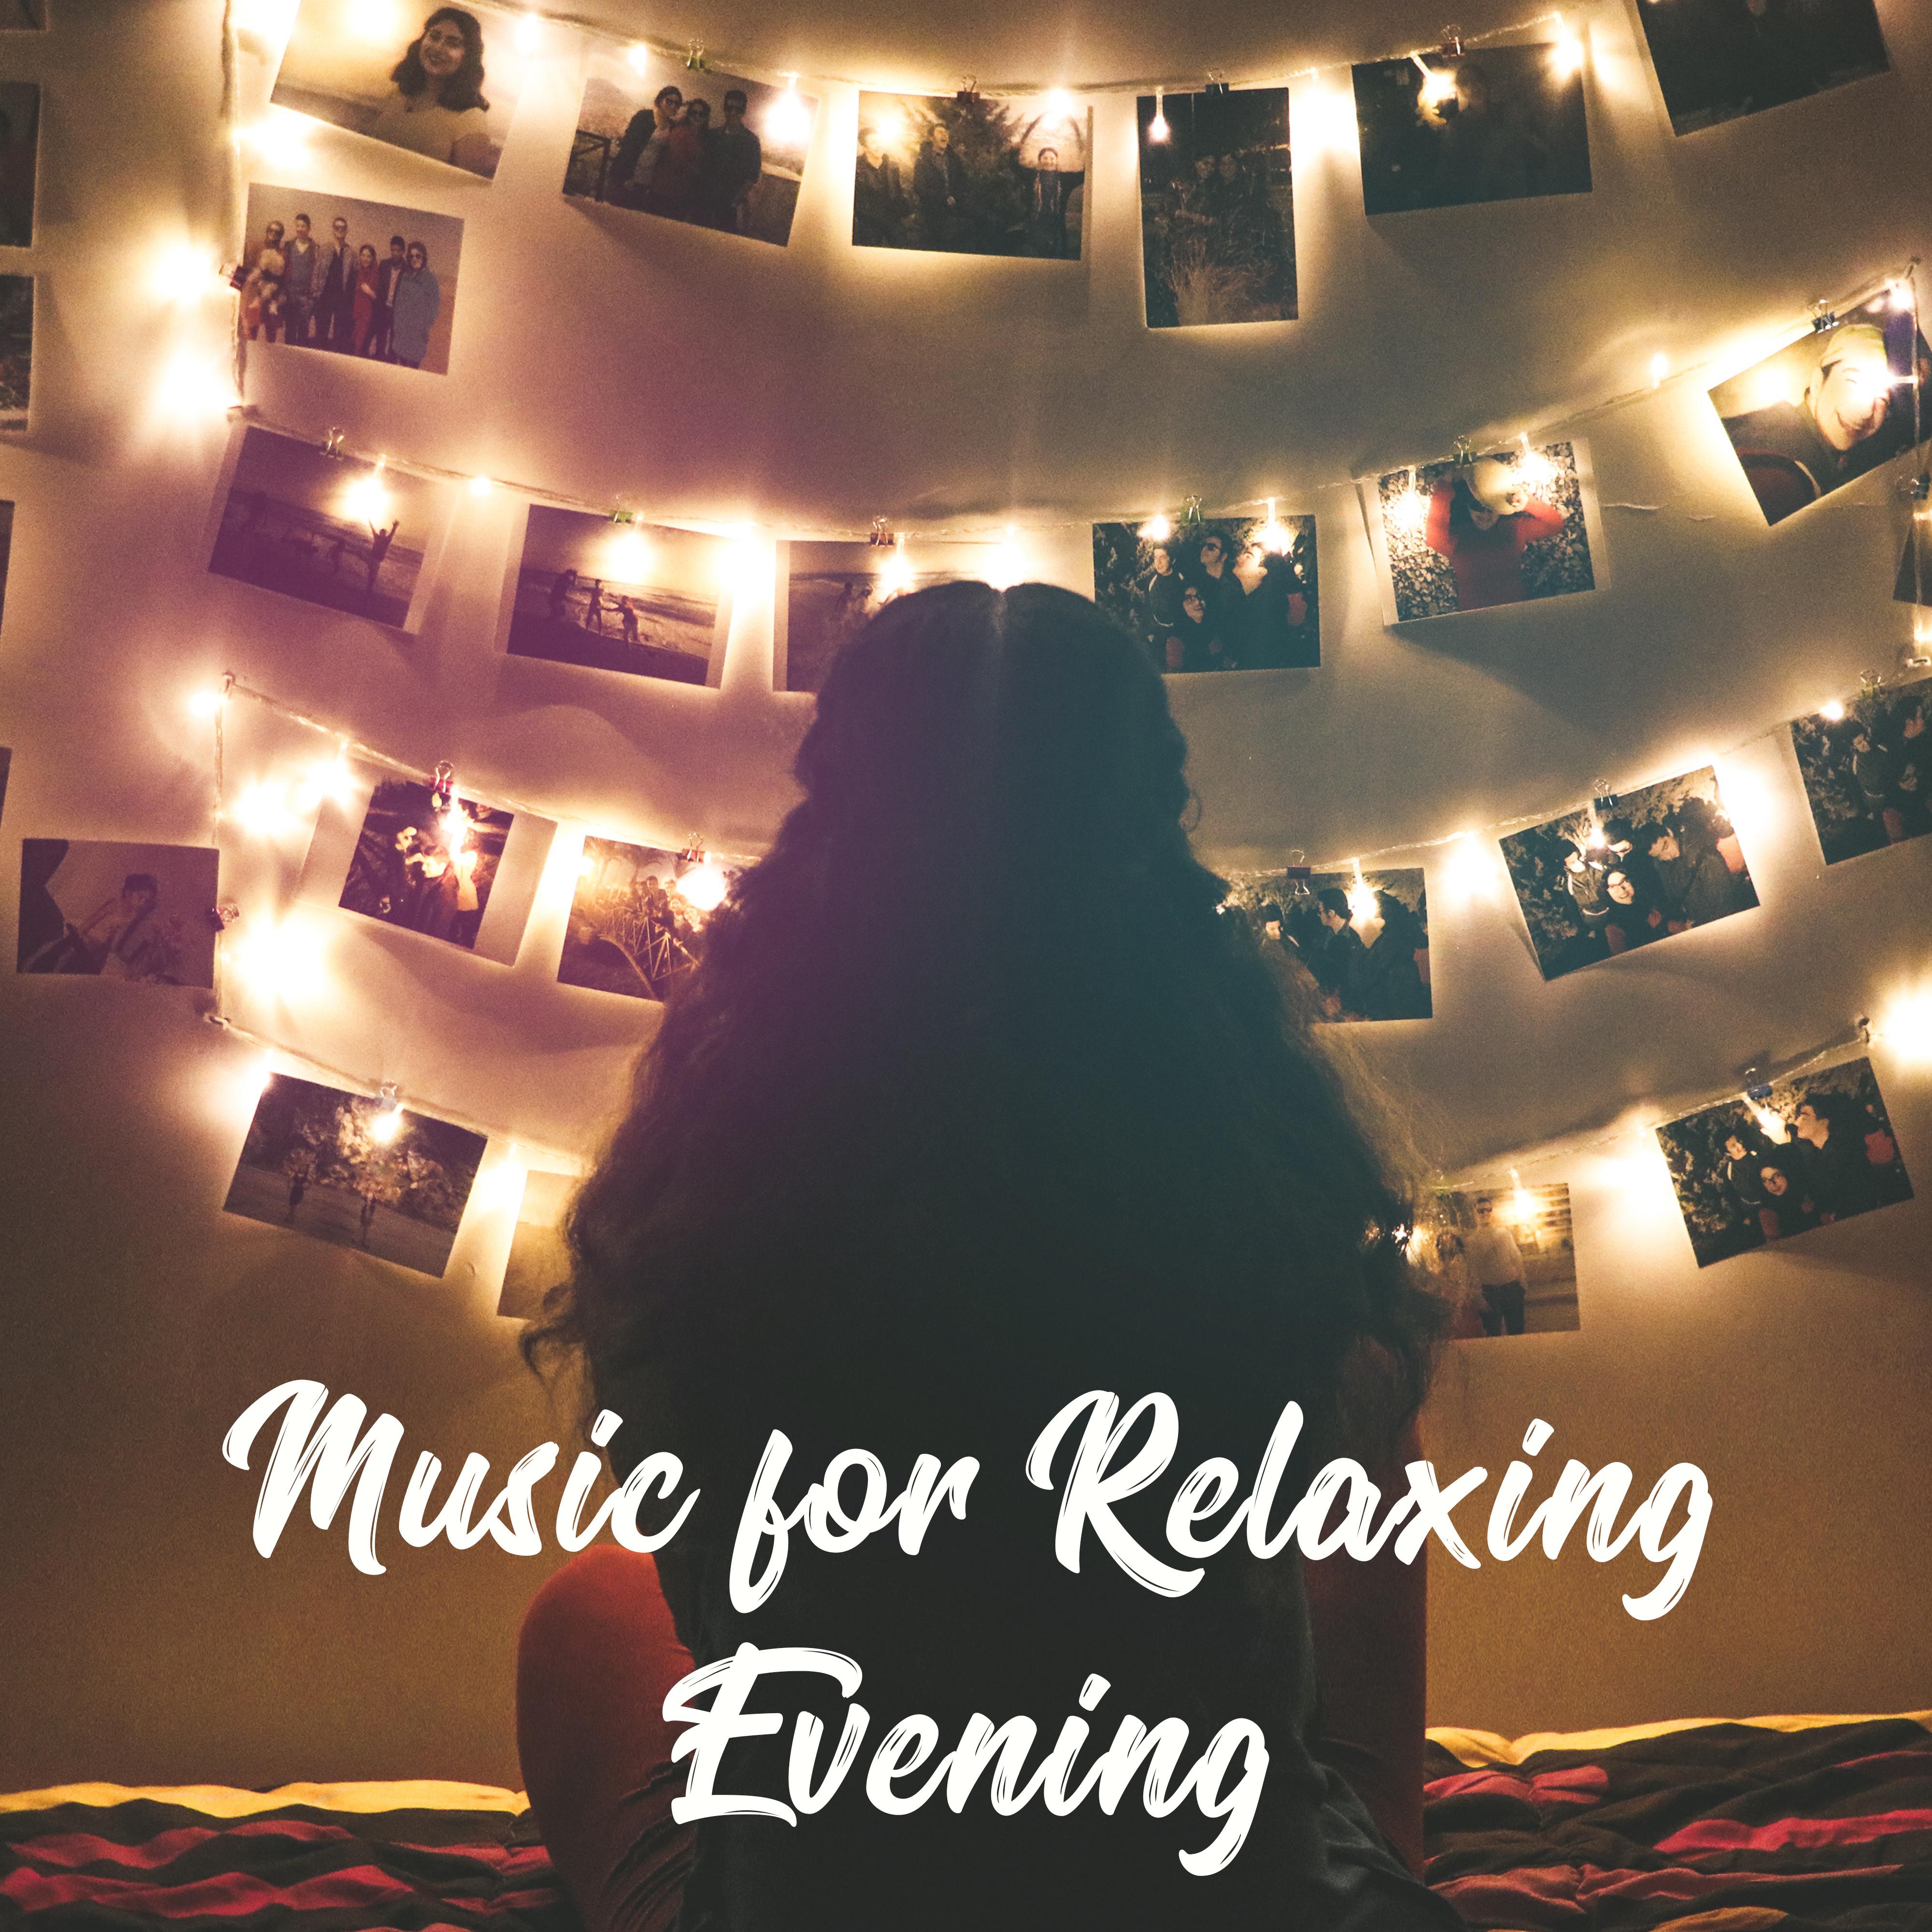 Music for Relaxing Evening